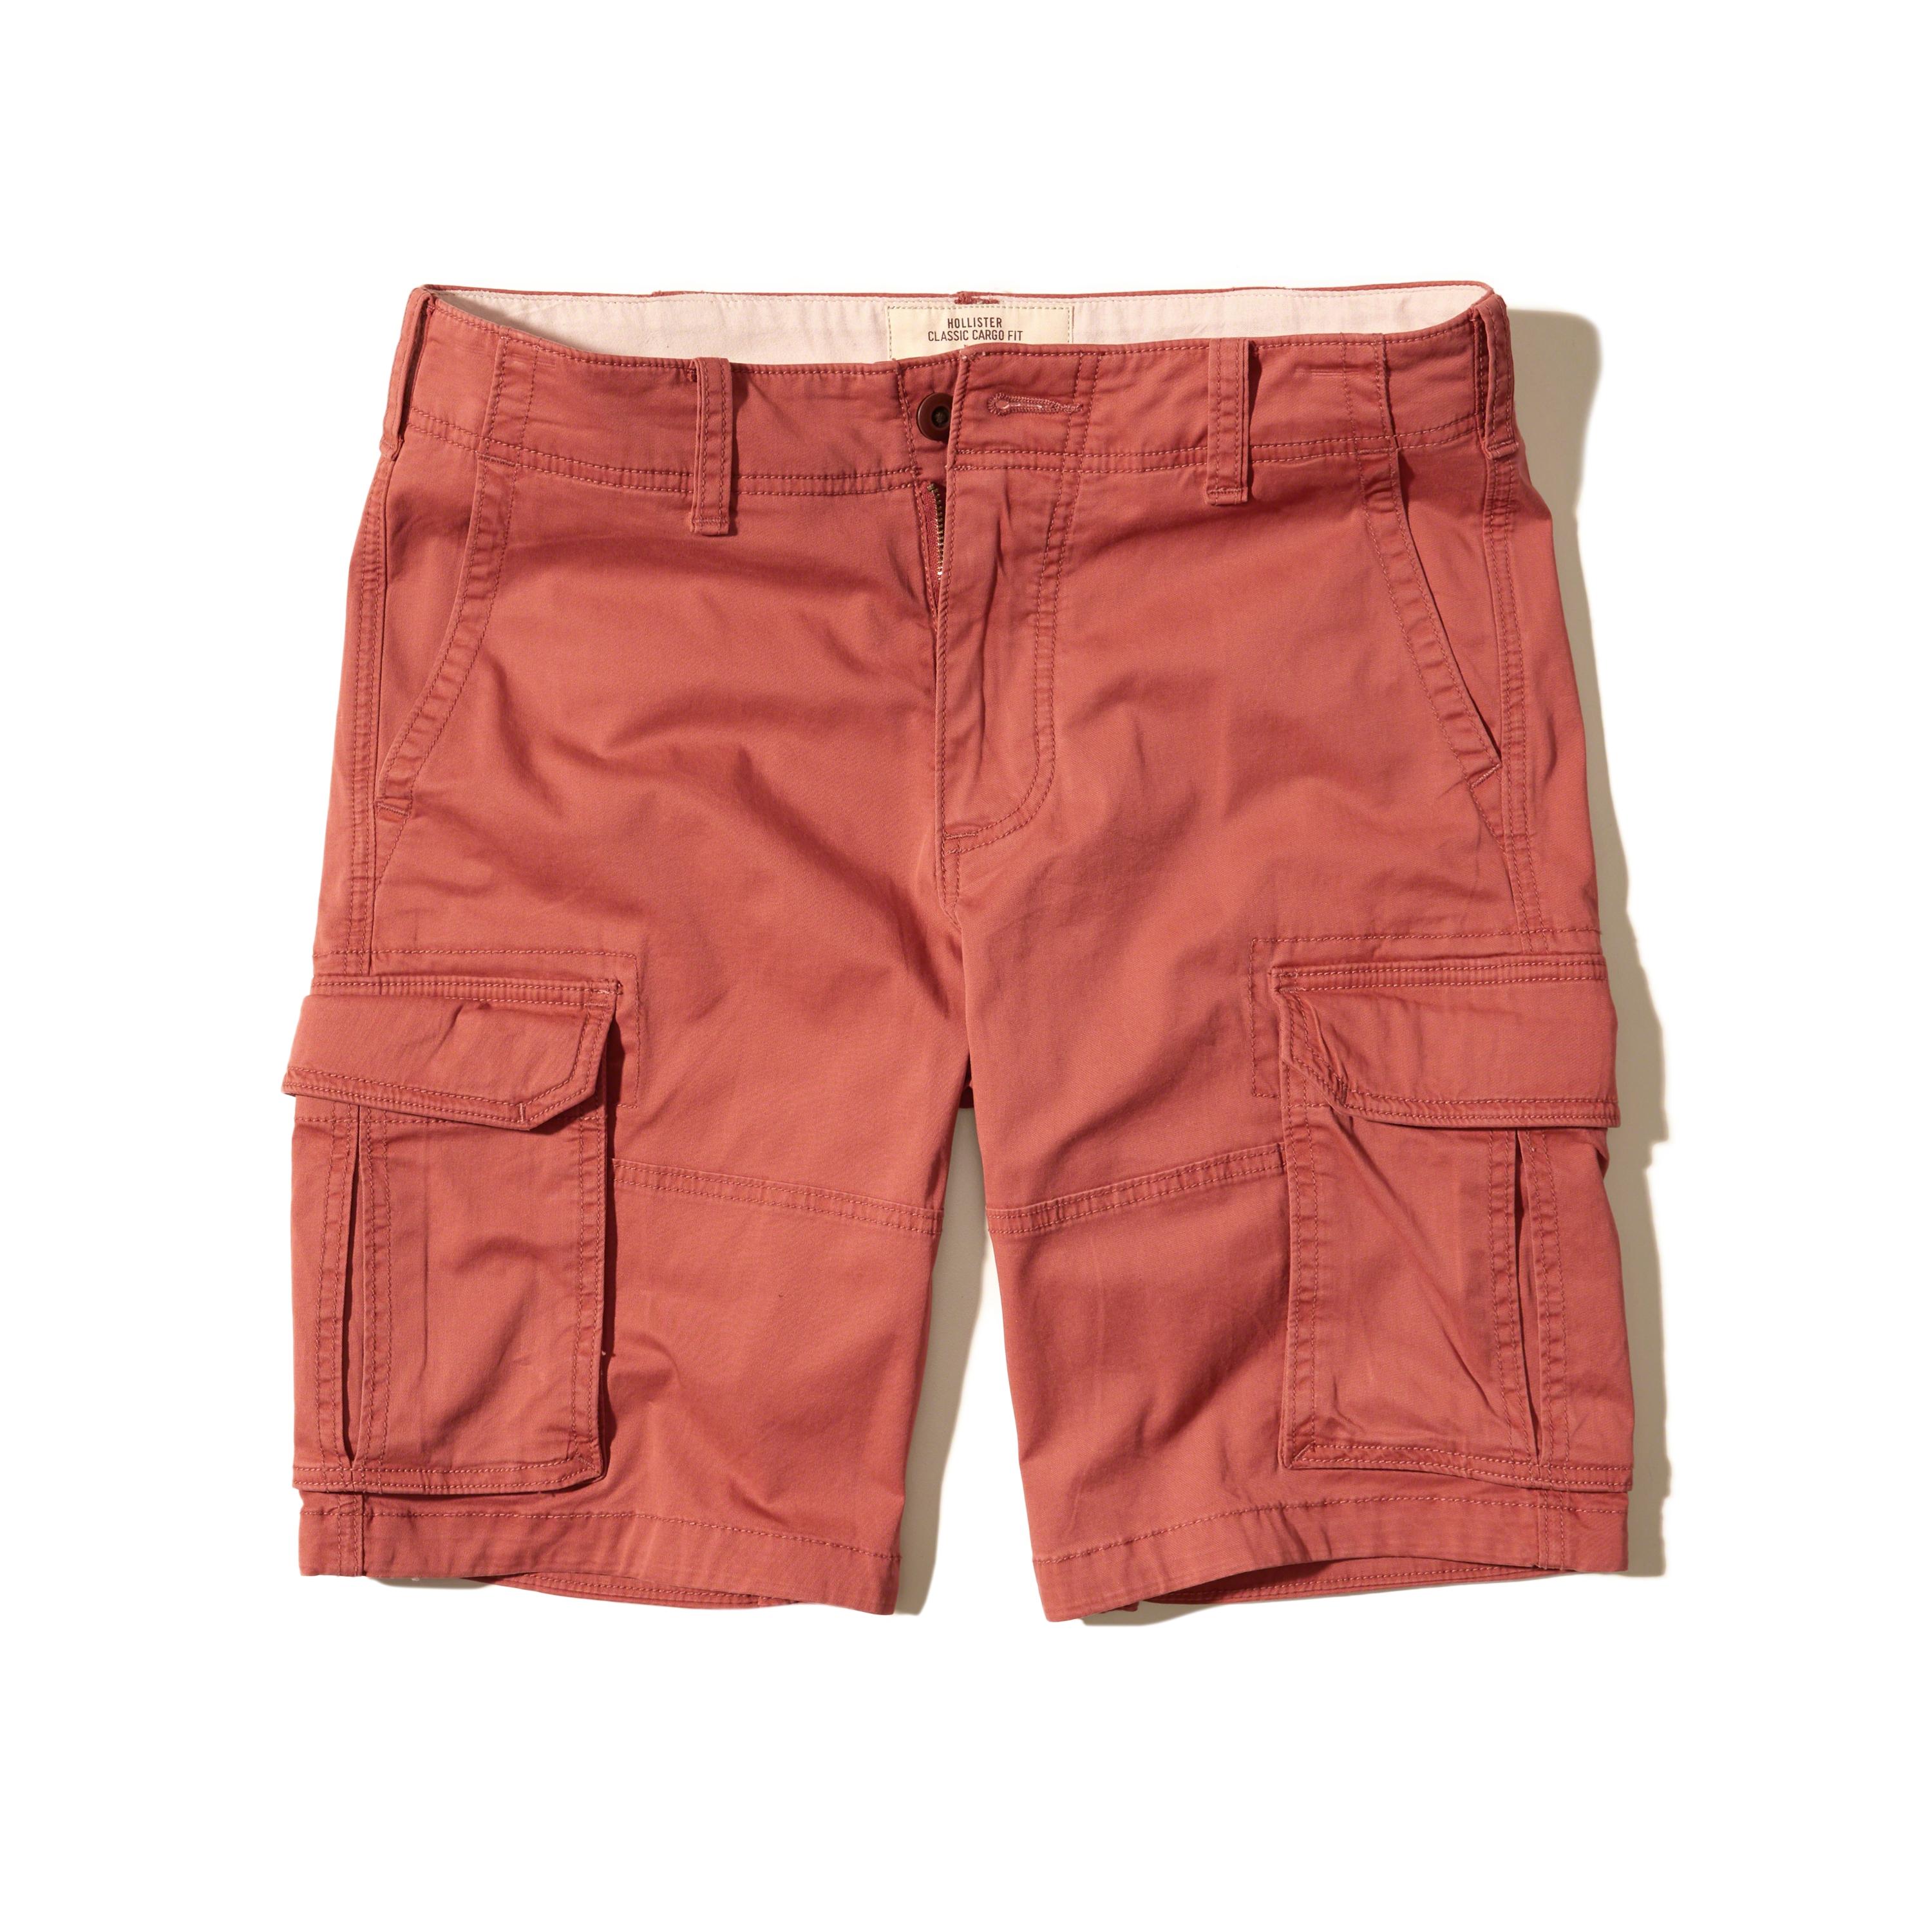 Lyst - Hollister Cargo Fit Shorts in Red for Men